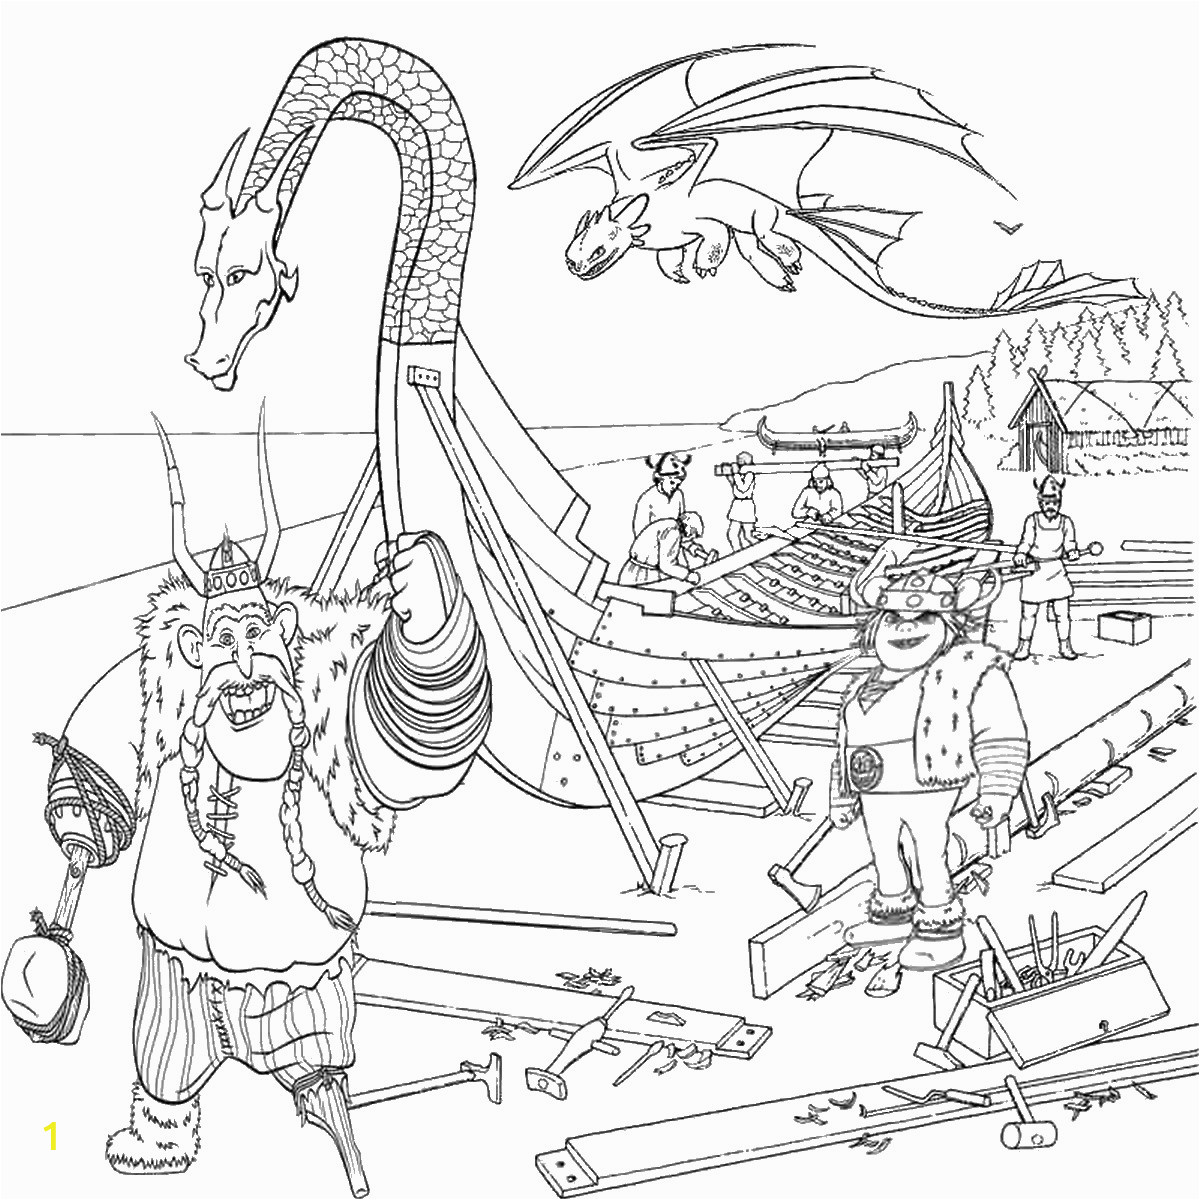 How to Train Your Dragon Coloring Pages Online How to Train Your Dragon Coloring Pages